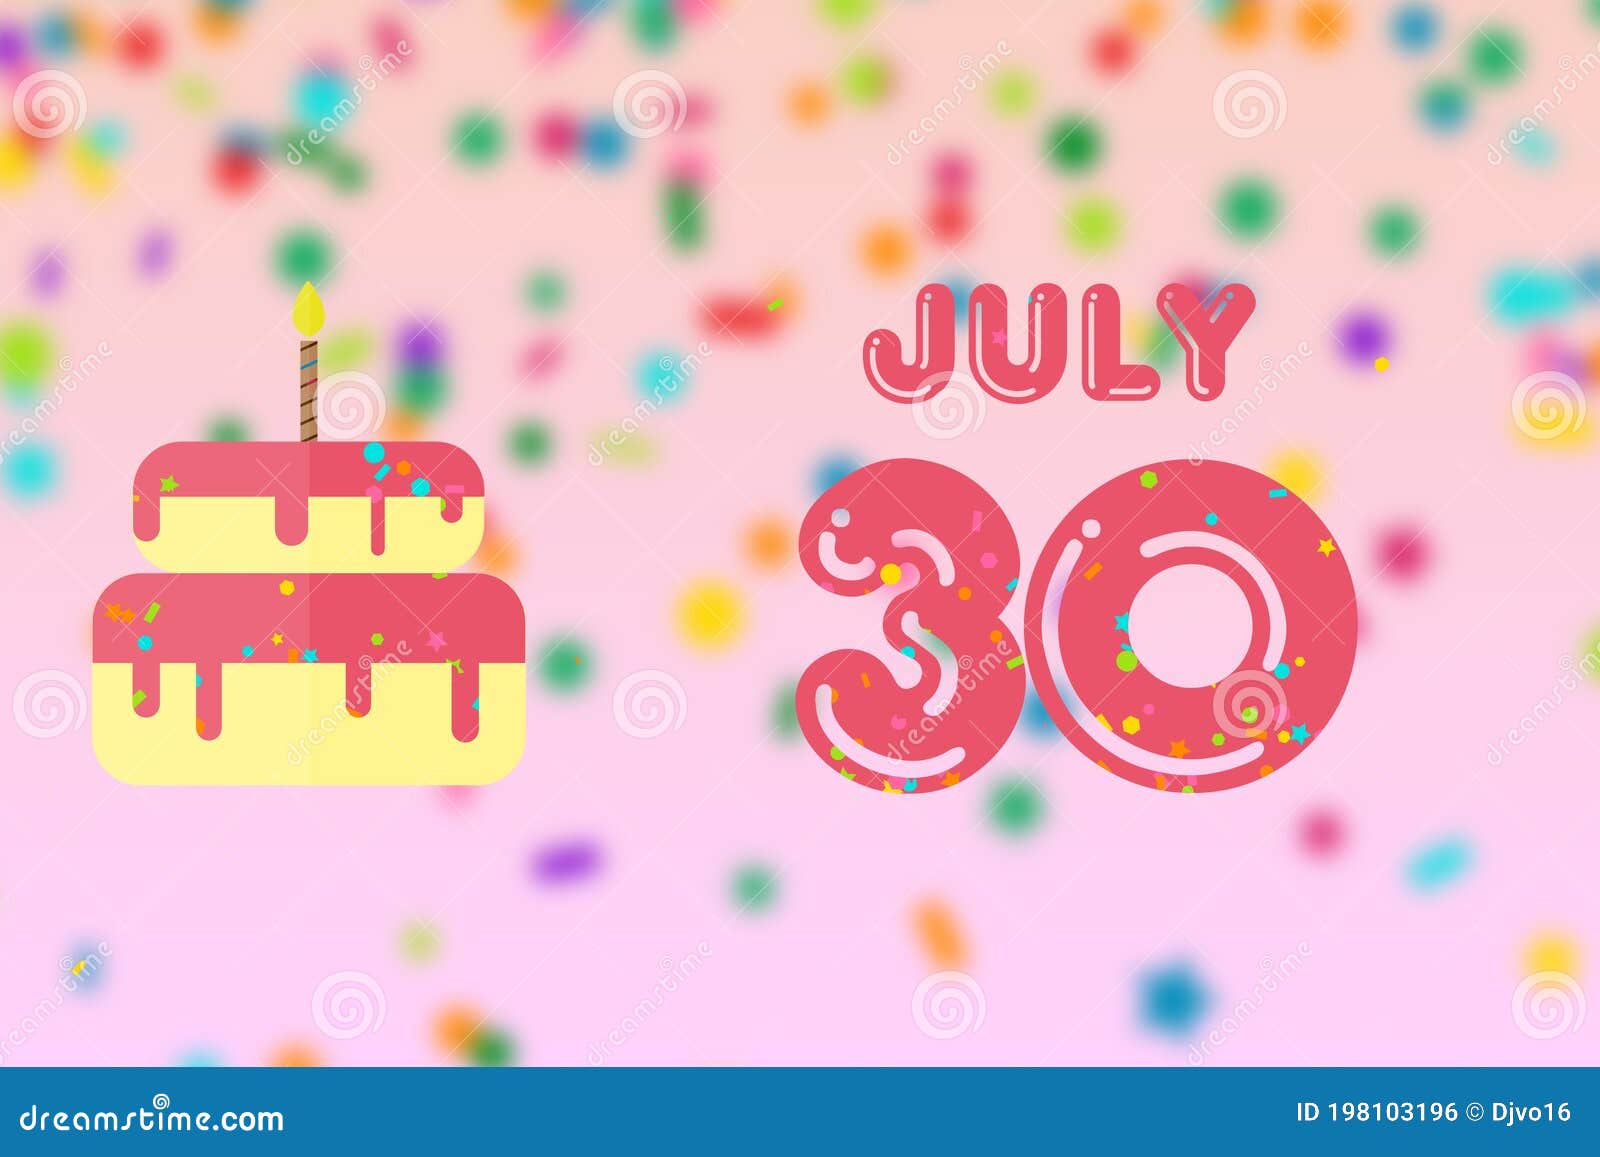 July 30th. Day 30 of Month,Birthday Greeting Card with Date of Birth and Birthday Cake. Summer Month, Day of the Year Concept Stock Illustration - Illustration of annual, summer: 198103196